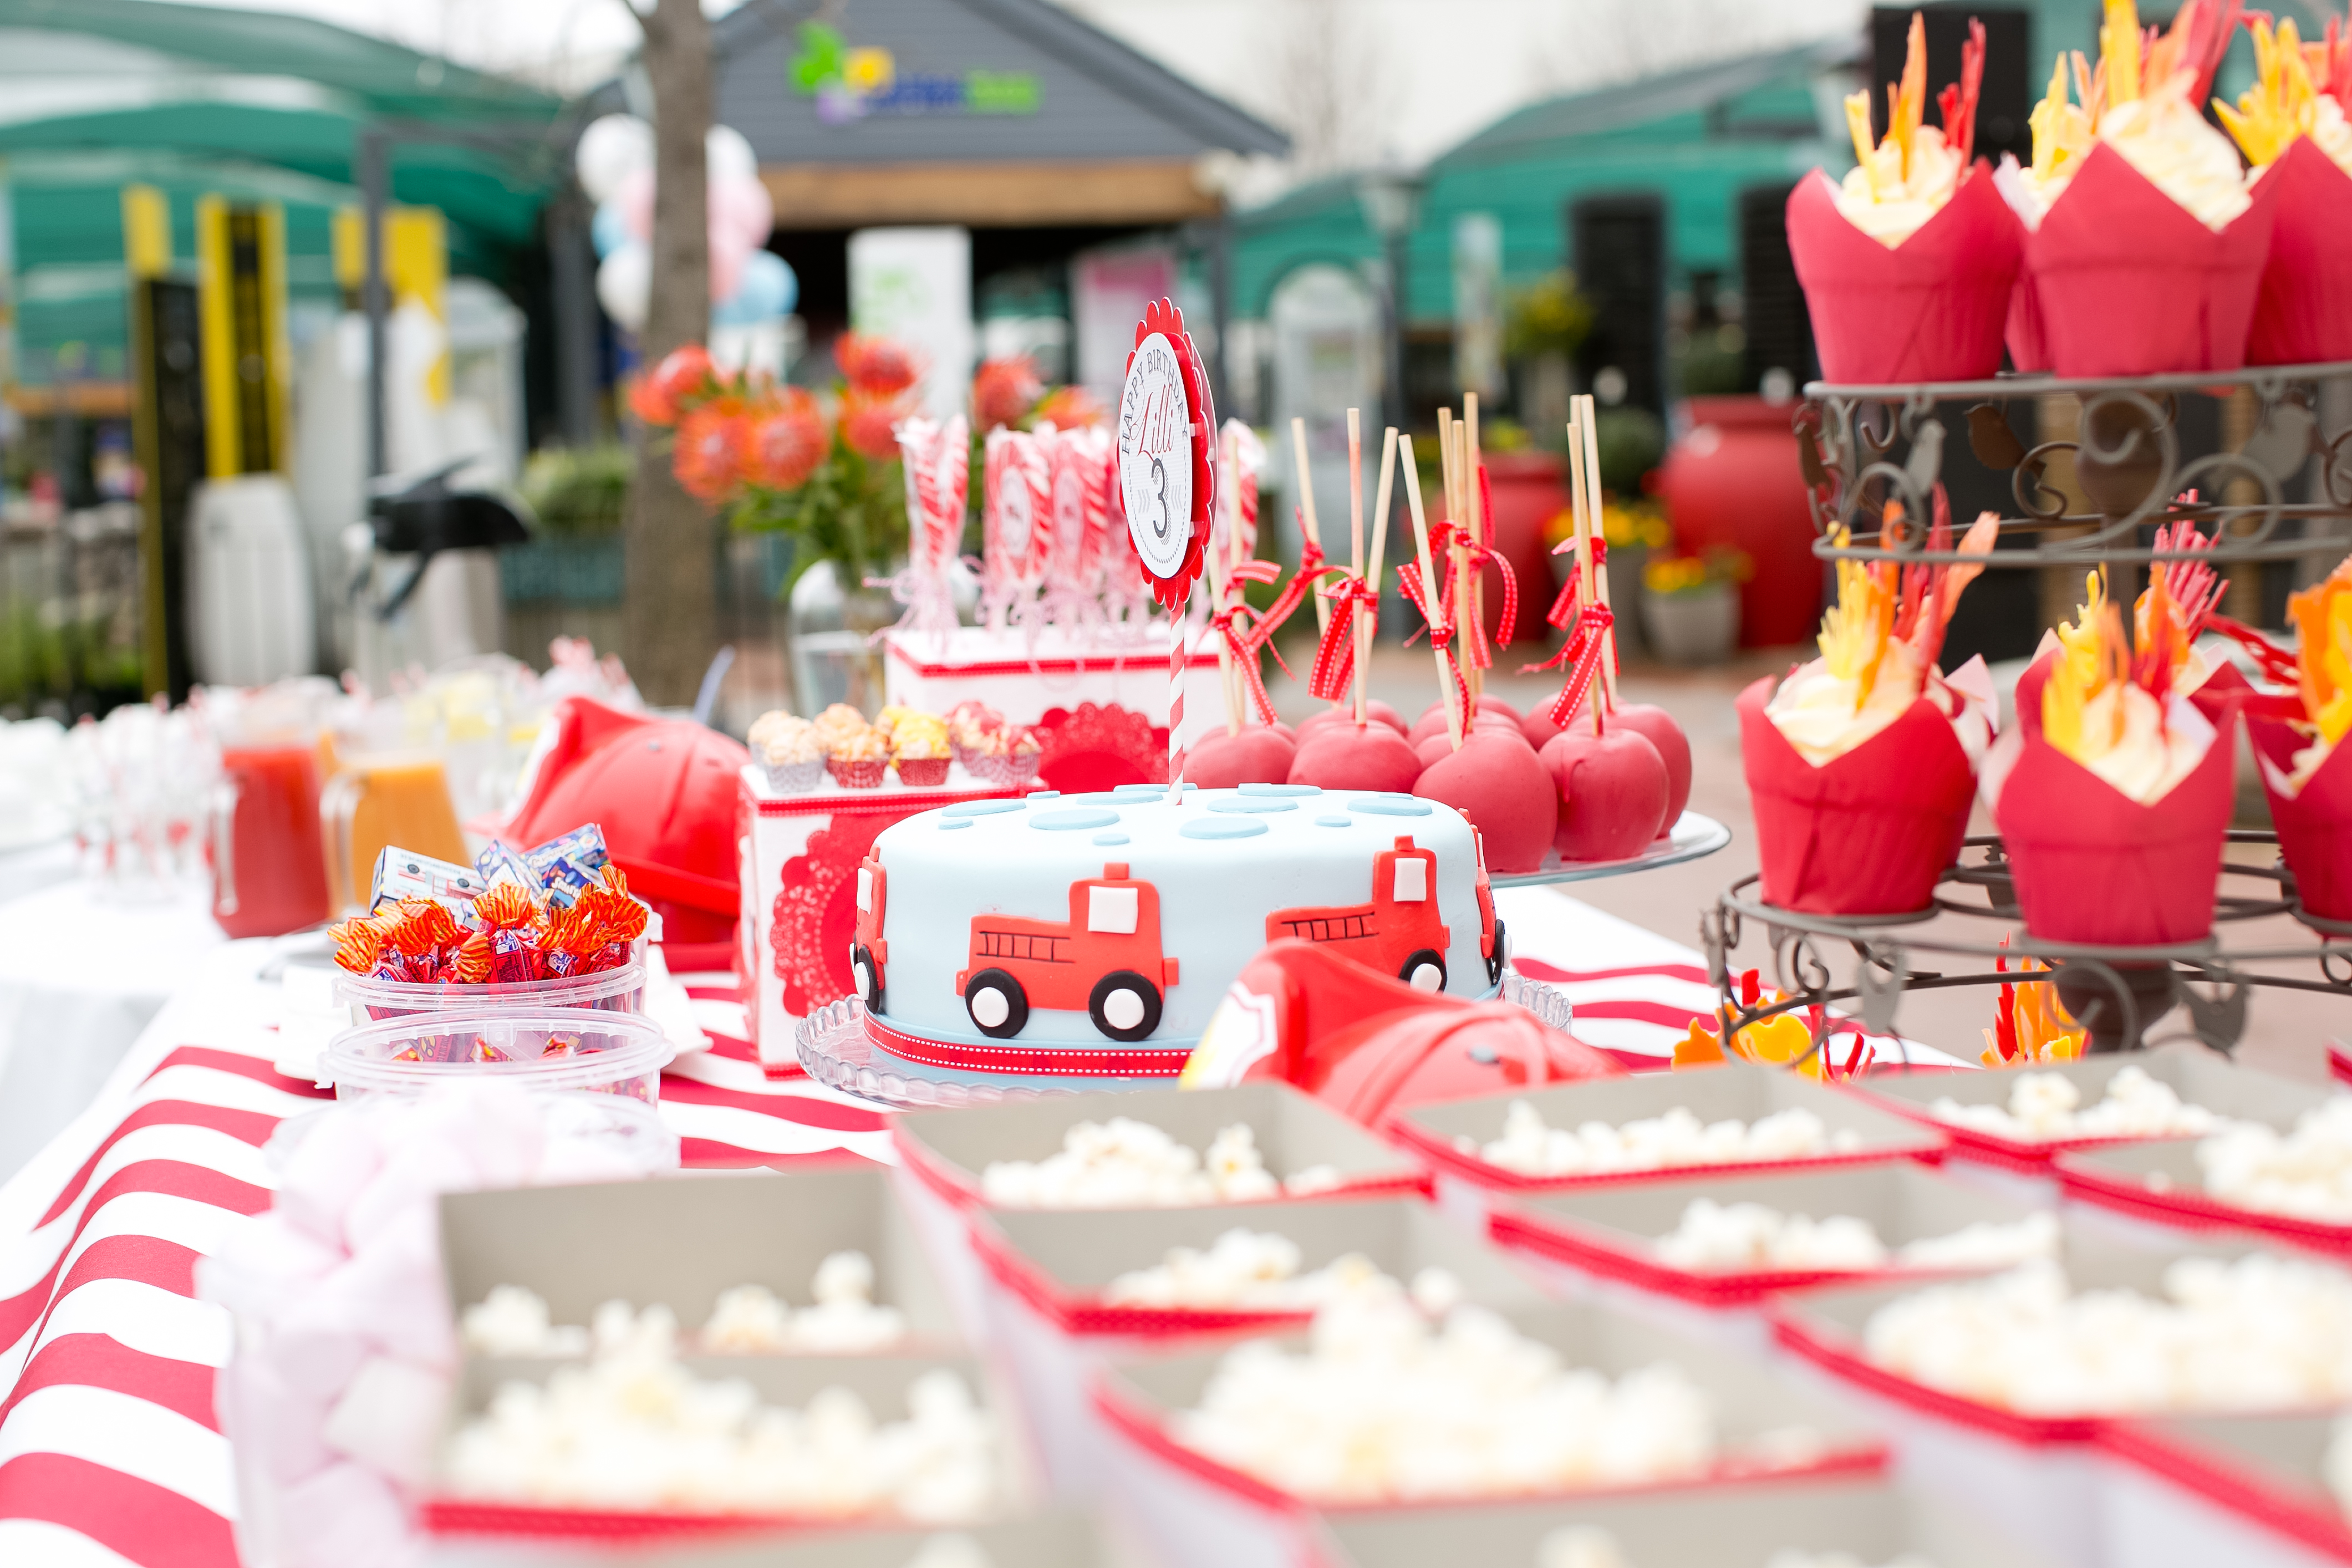 Fire Engine kids party Birthday cake and candy table